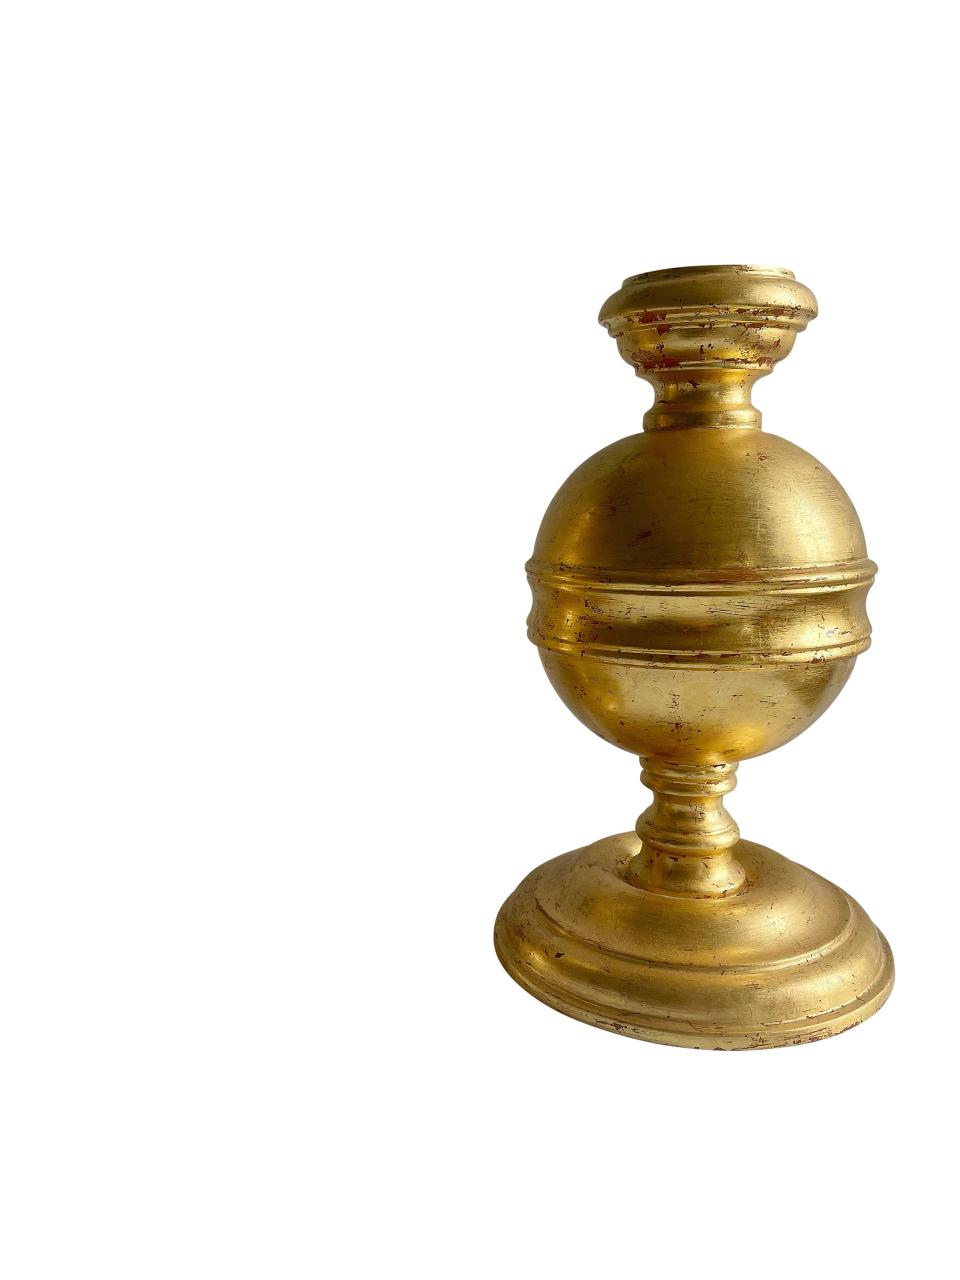 Gilt Candleholder painted by Jay C. Lohmann; price upon request. jayclohmann.com